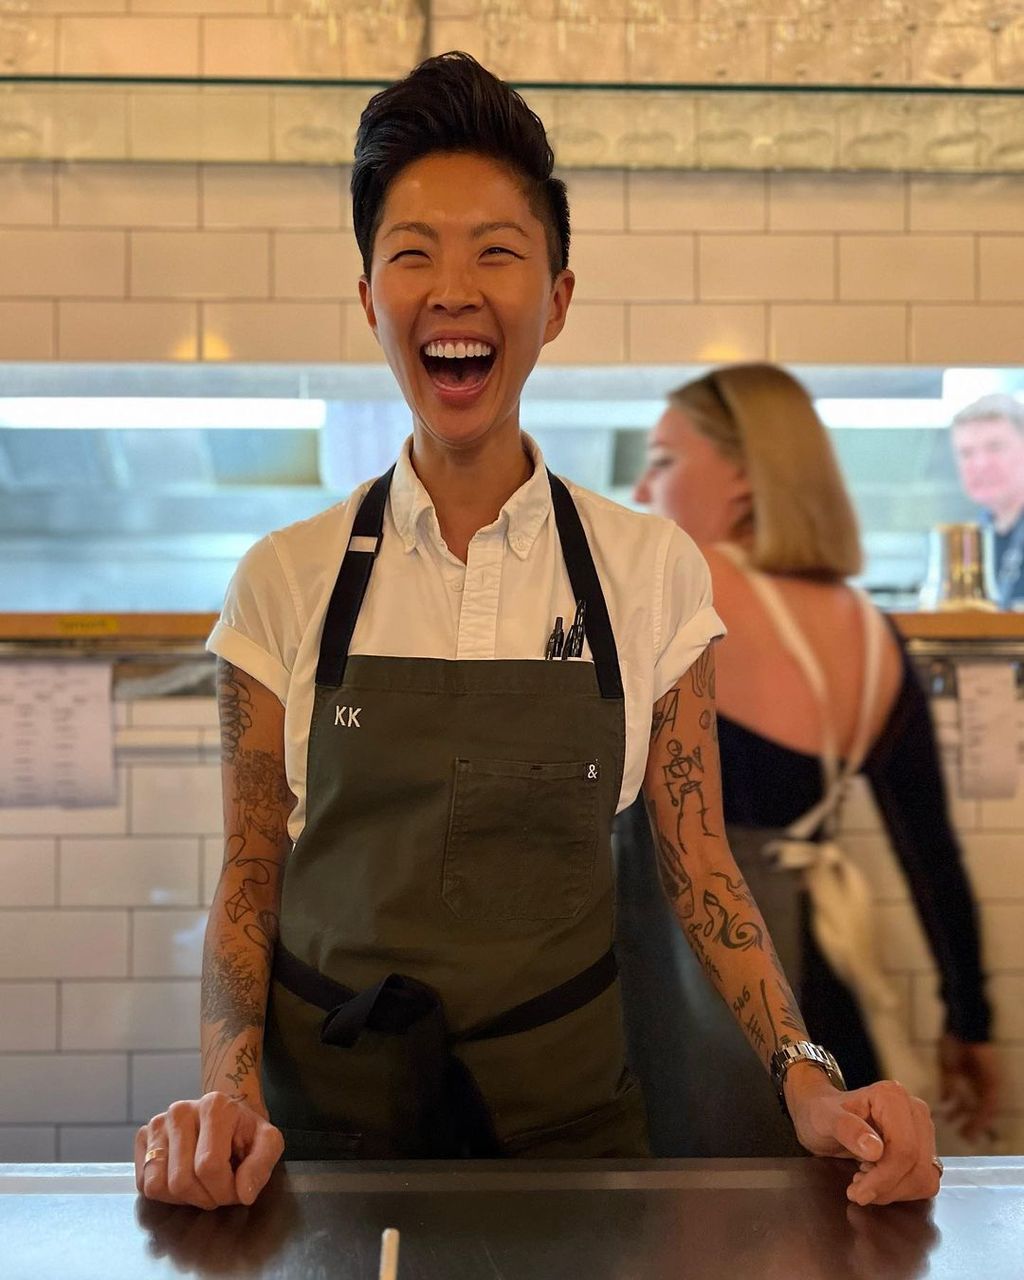 Kristen Kish has joined Top Chef as the new host